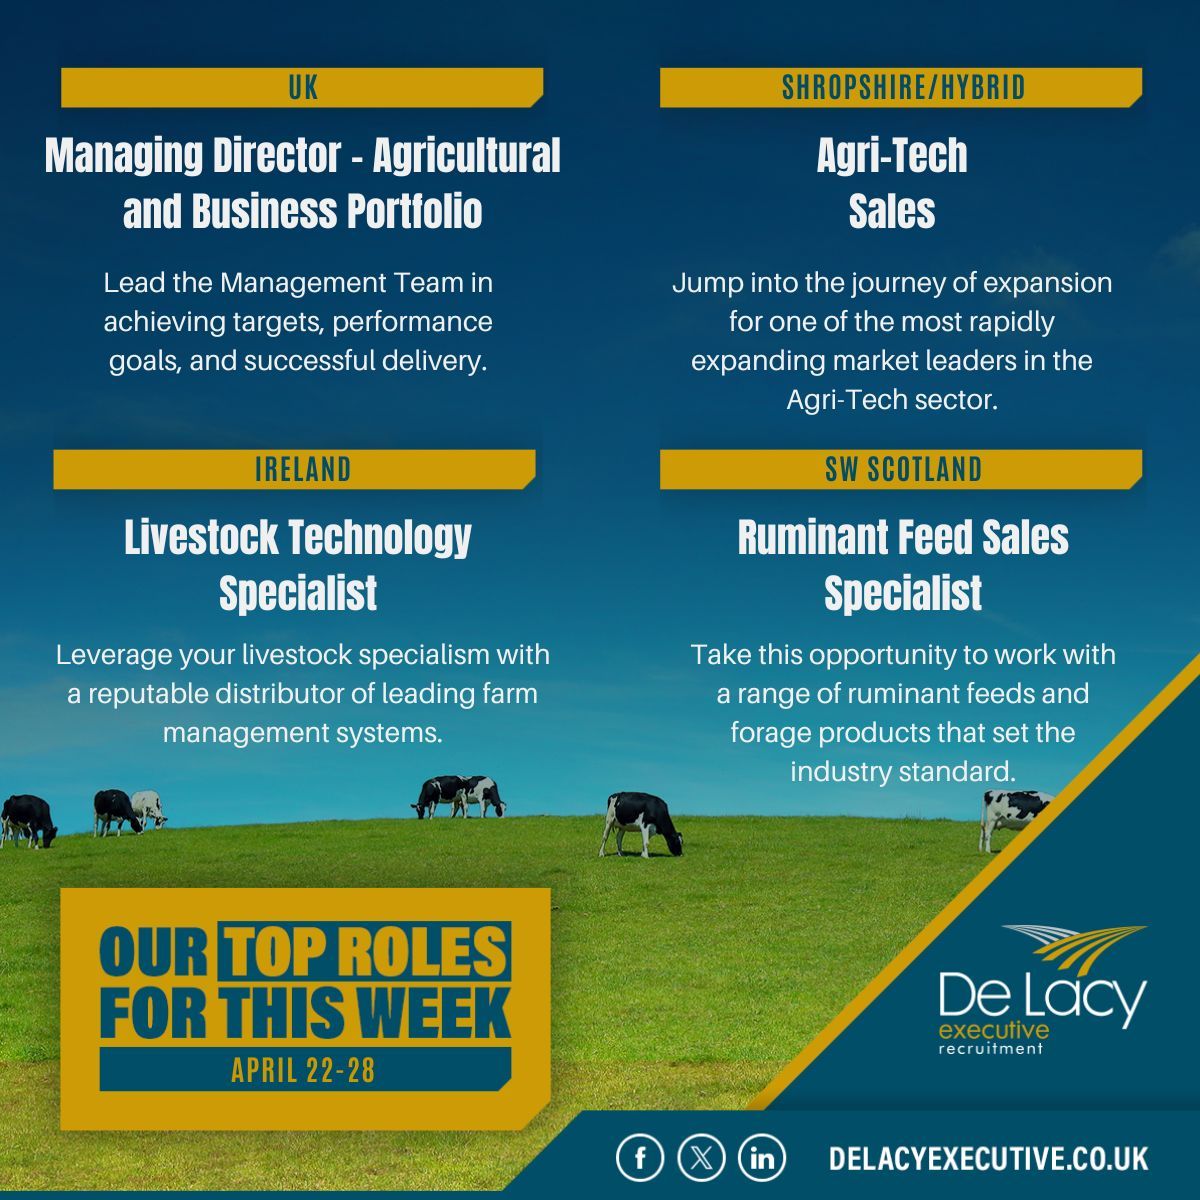 Top Roles for This Week: April 22-28 ⬇️ 

From a #ManagingDirector and #AgriTech Sales to a #Ruminant Feed Sales Specialist and #Livestock Technology Specialist, these are our Top Roles for This Week! 

Explore these #careers & more: delacyexecutive.co.uk/job-seekers/jo…

#UKAg #UKJobs #AgJobs